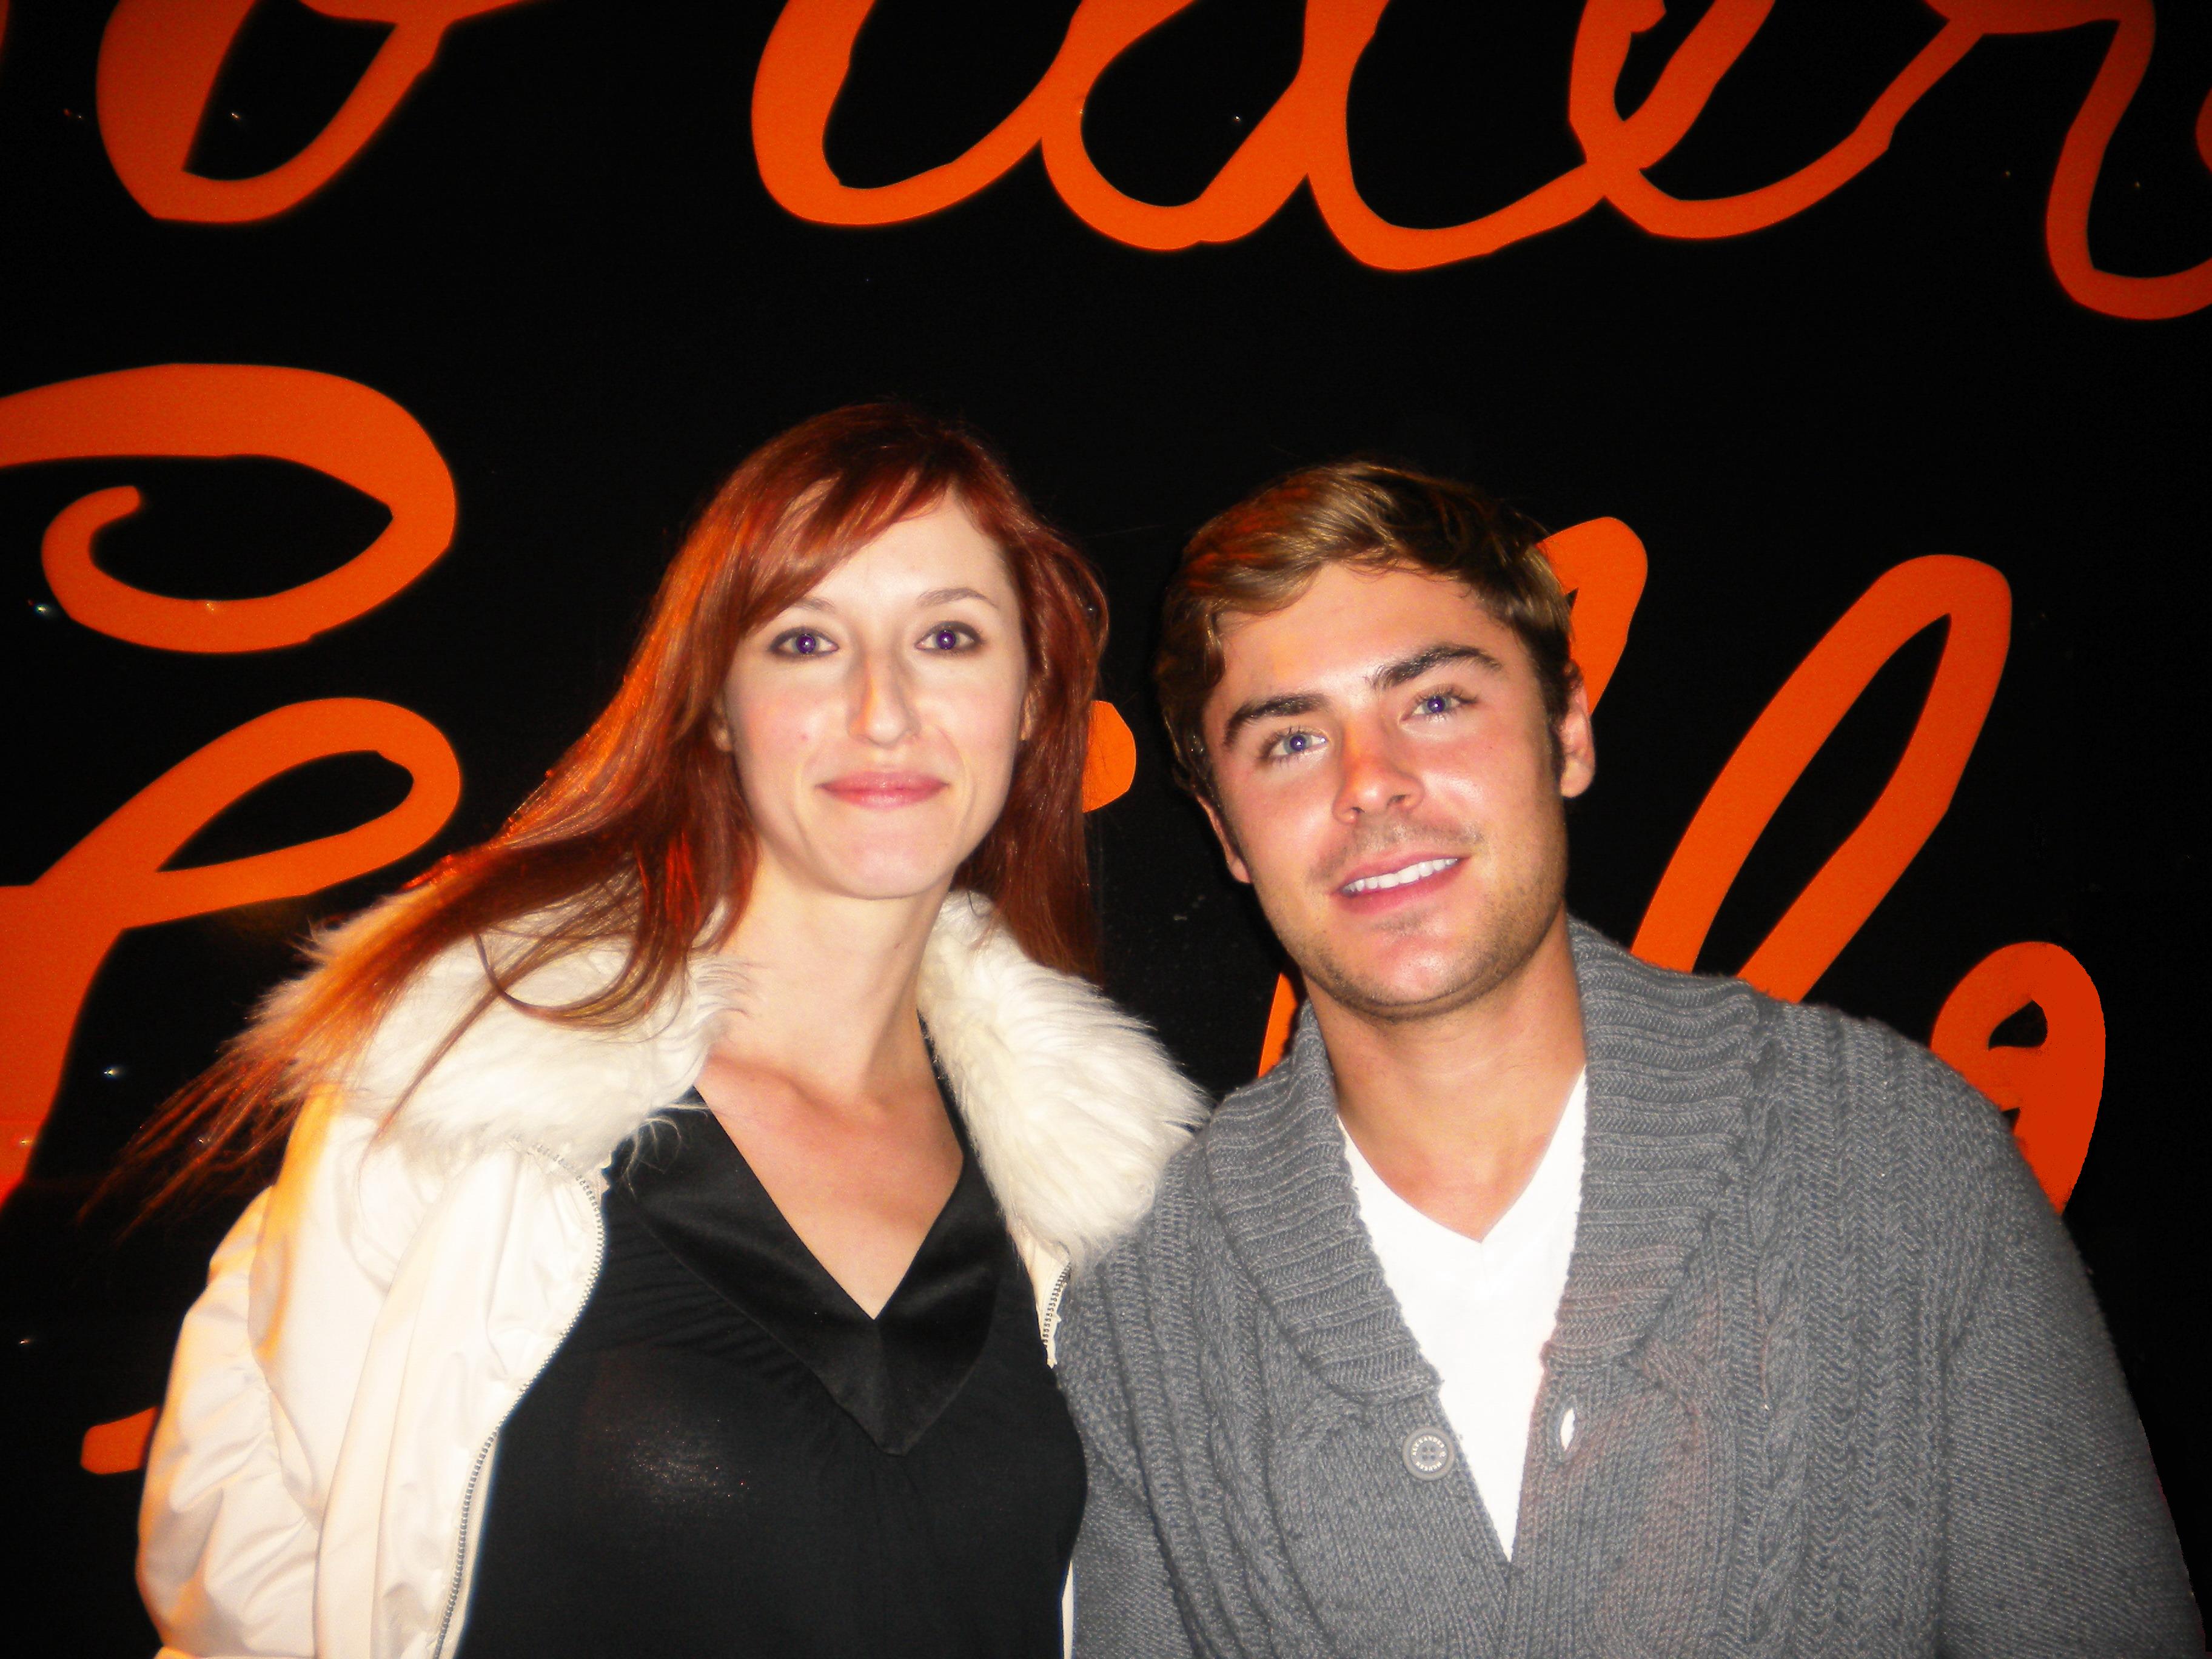 Linda Paice and Zac Efron at Fox for the 